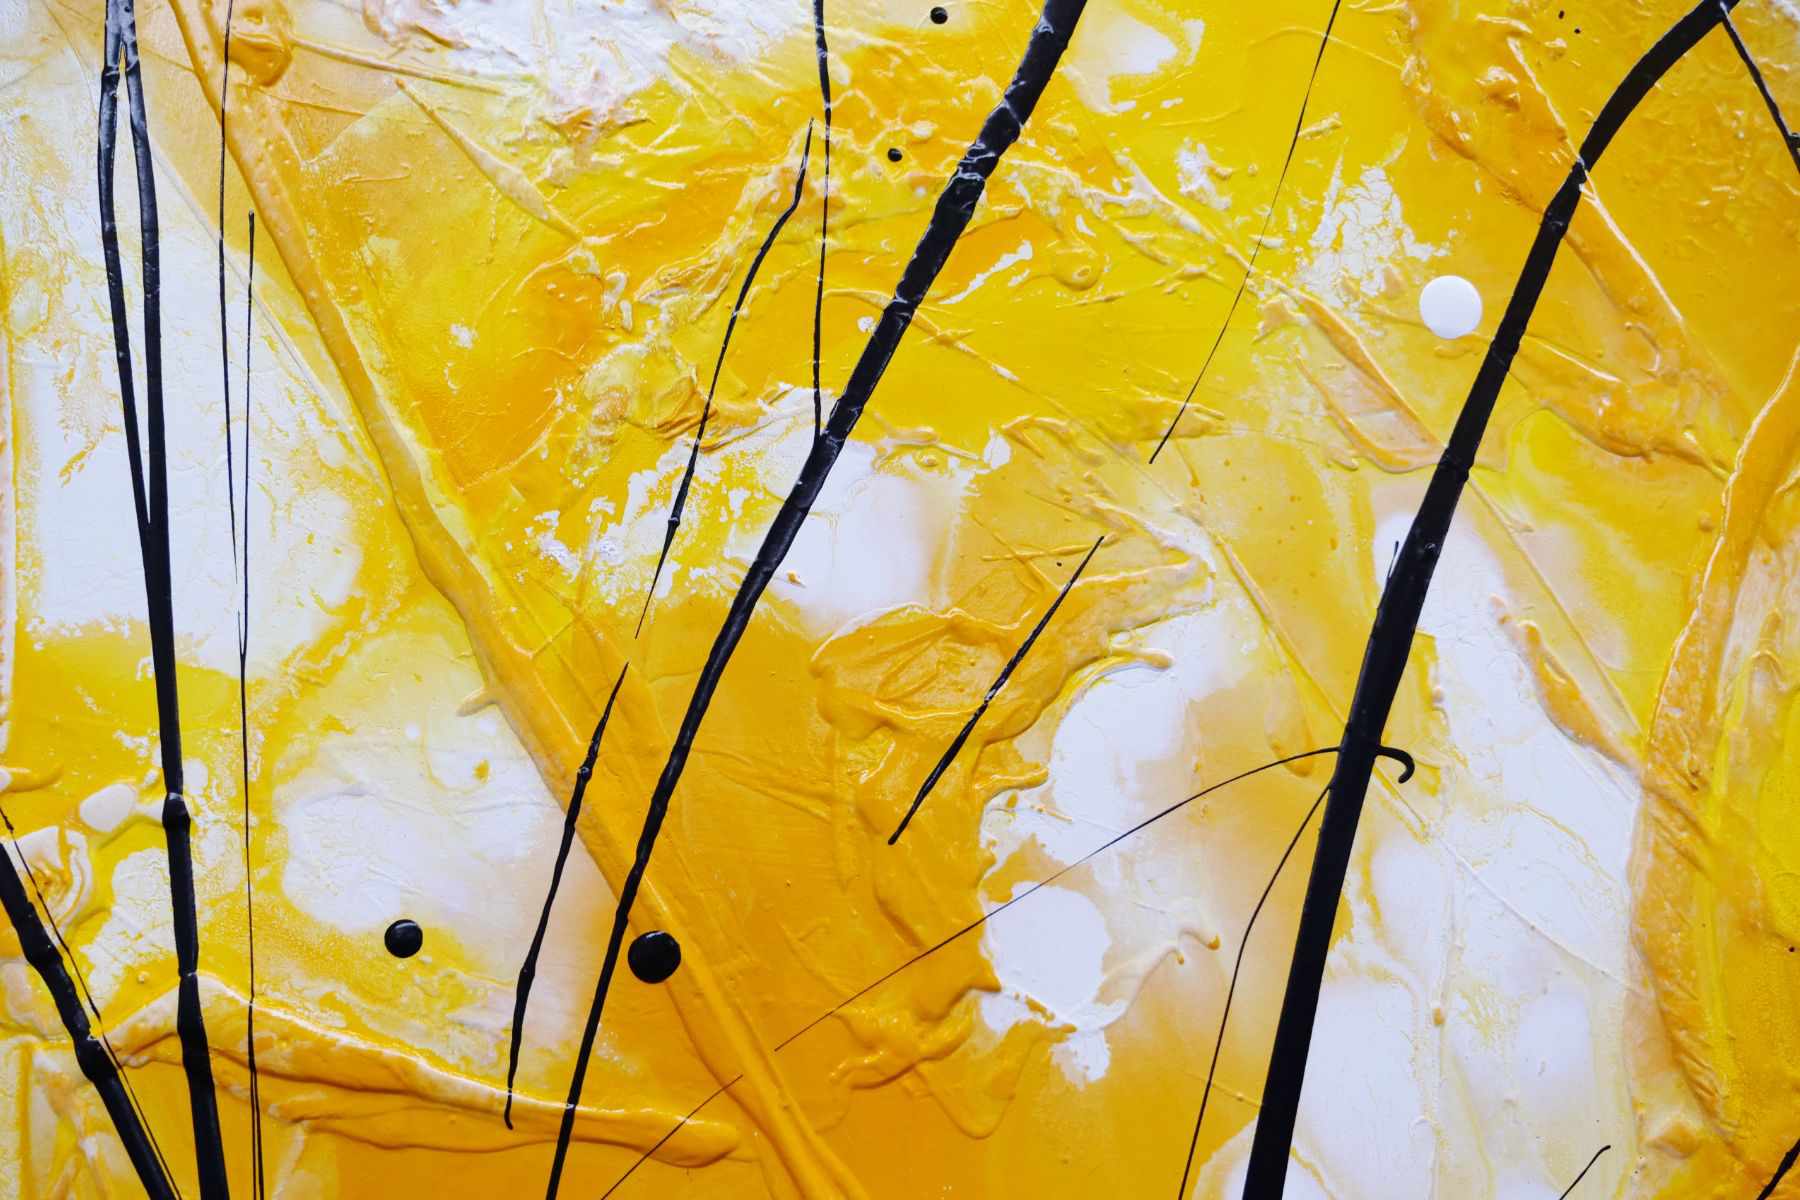 Golden Bandit 240cm x 120cm Yellow White Black Textured Abstract Painting (SOLD)